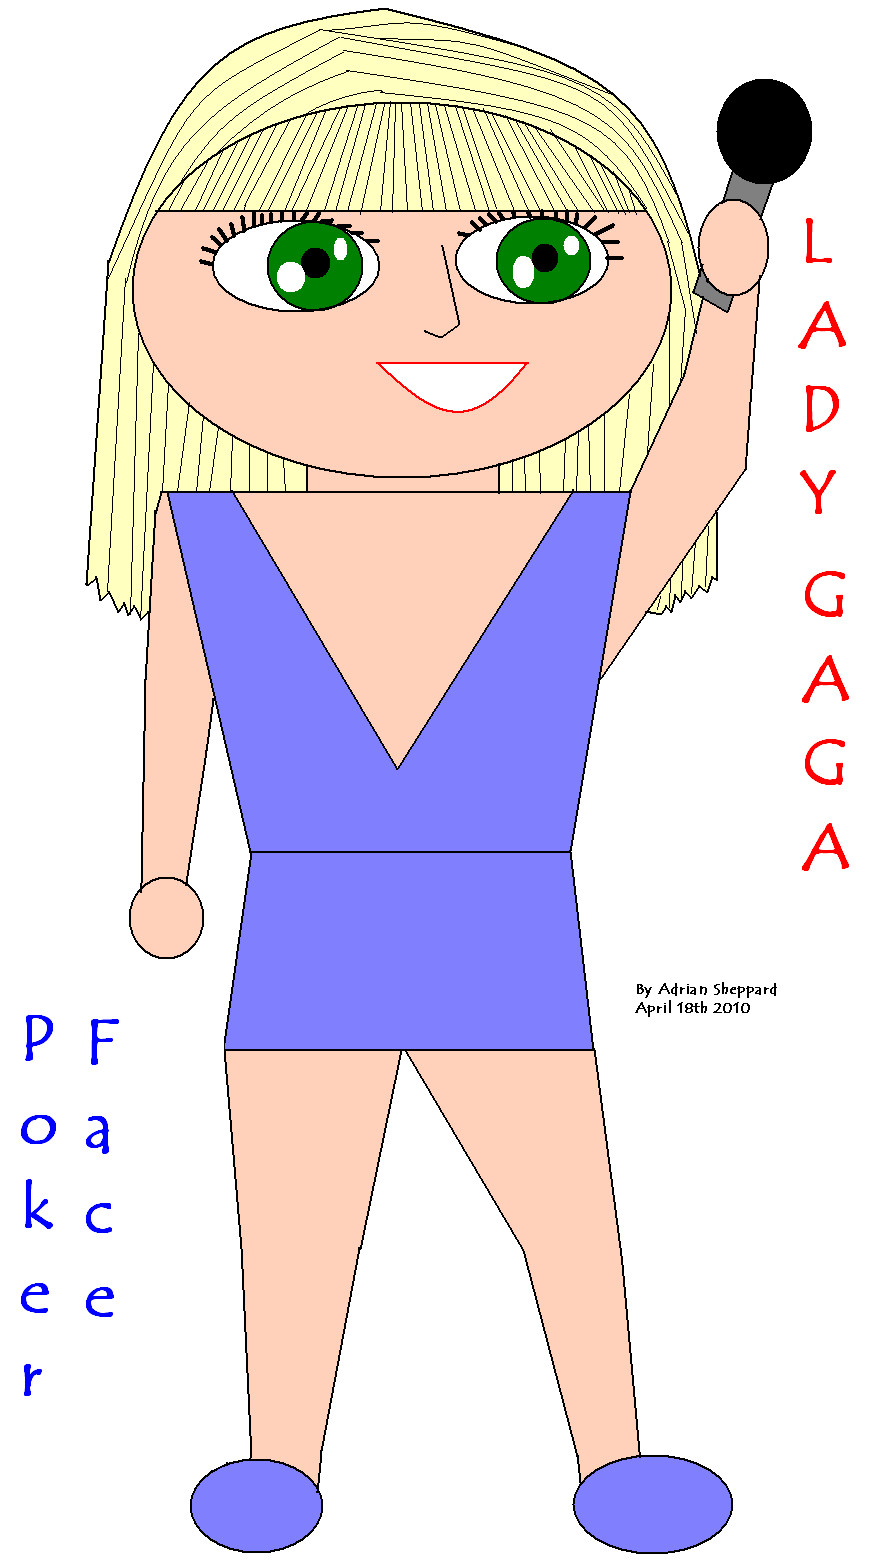 Lady GaGa MS Paint by adsheppard